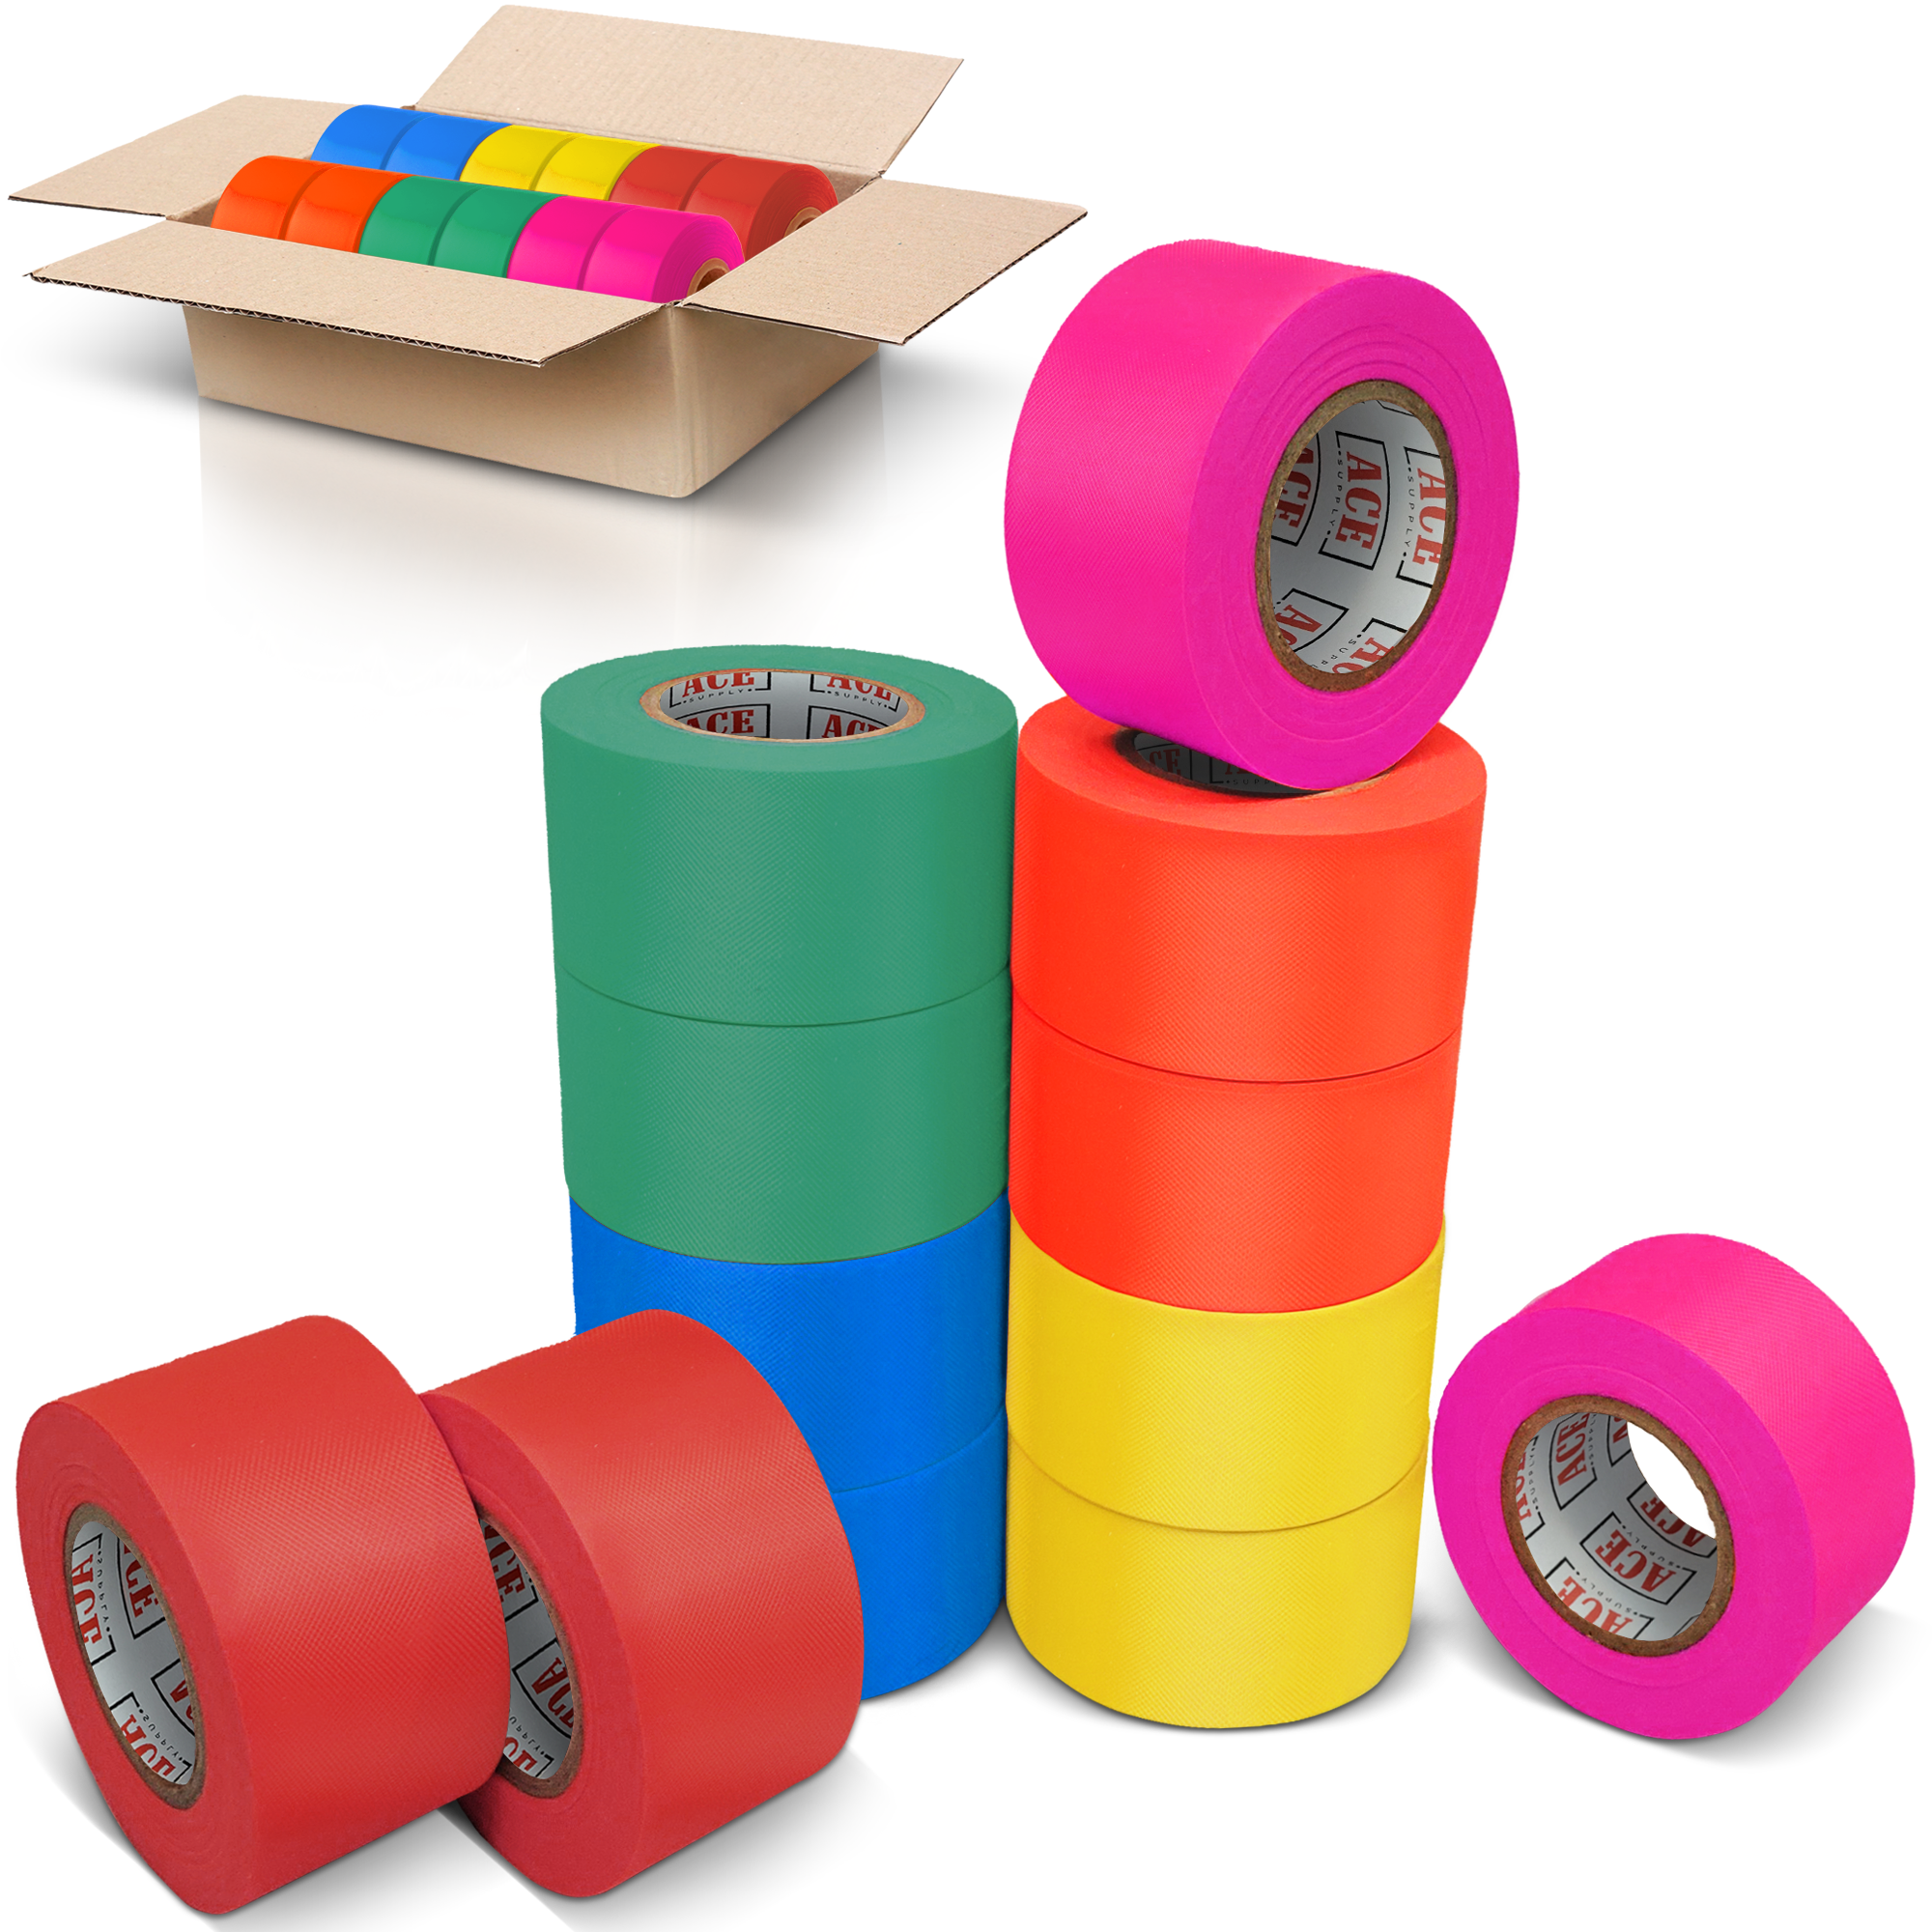 Flagging Tape Assorted Colors - 12 Pack - Non-Adhesive